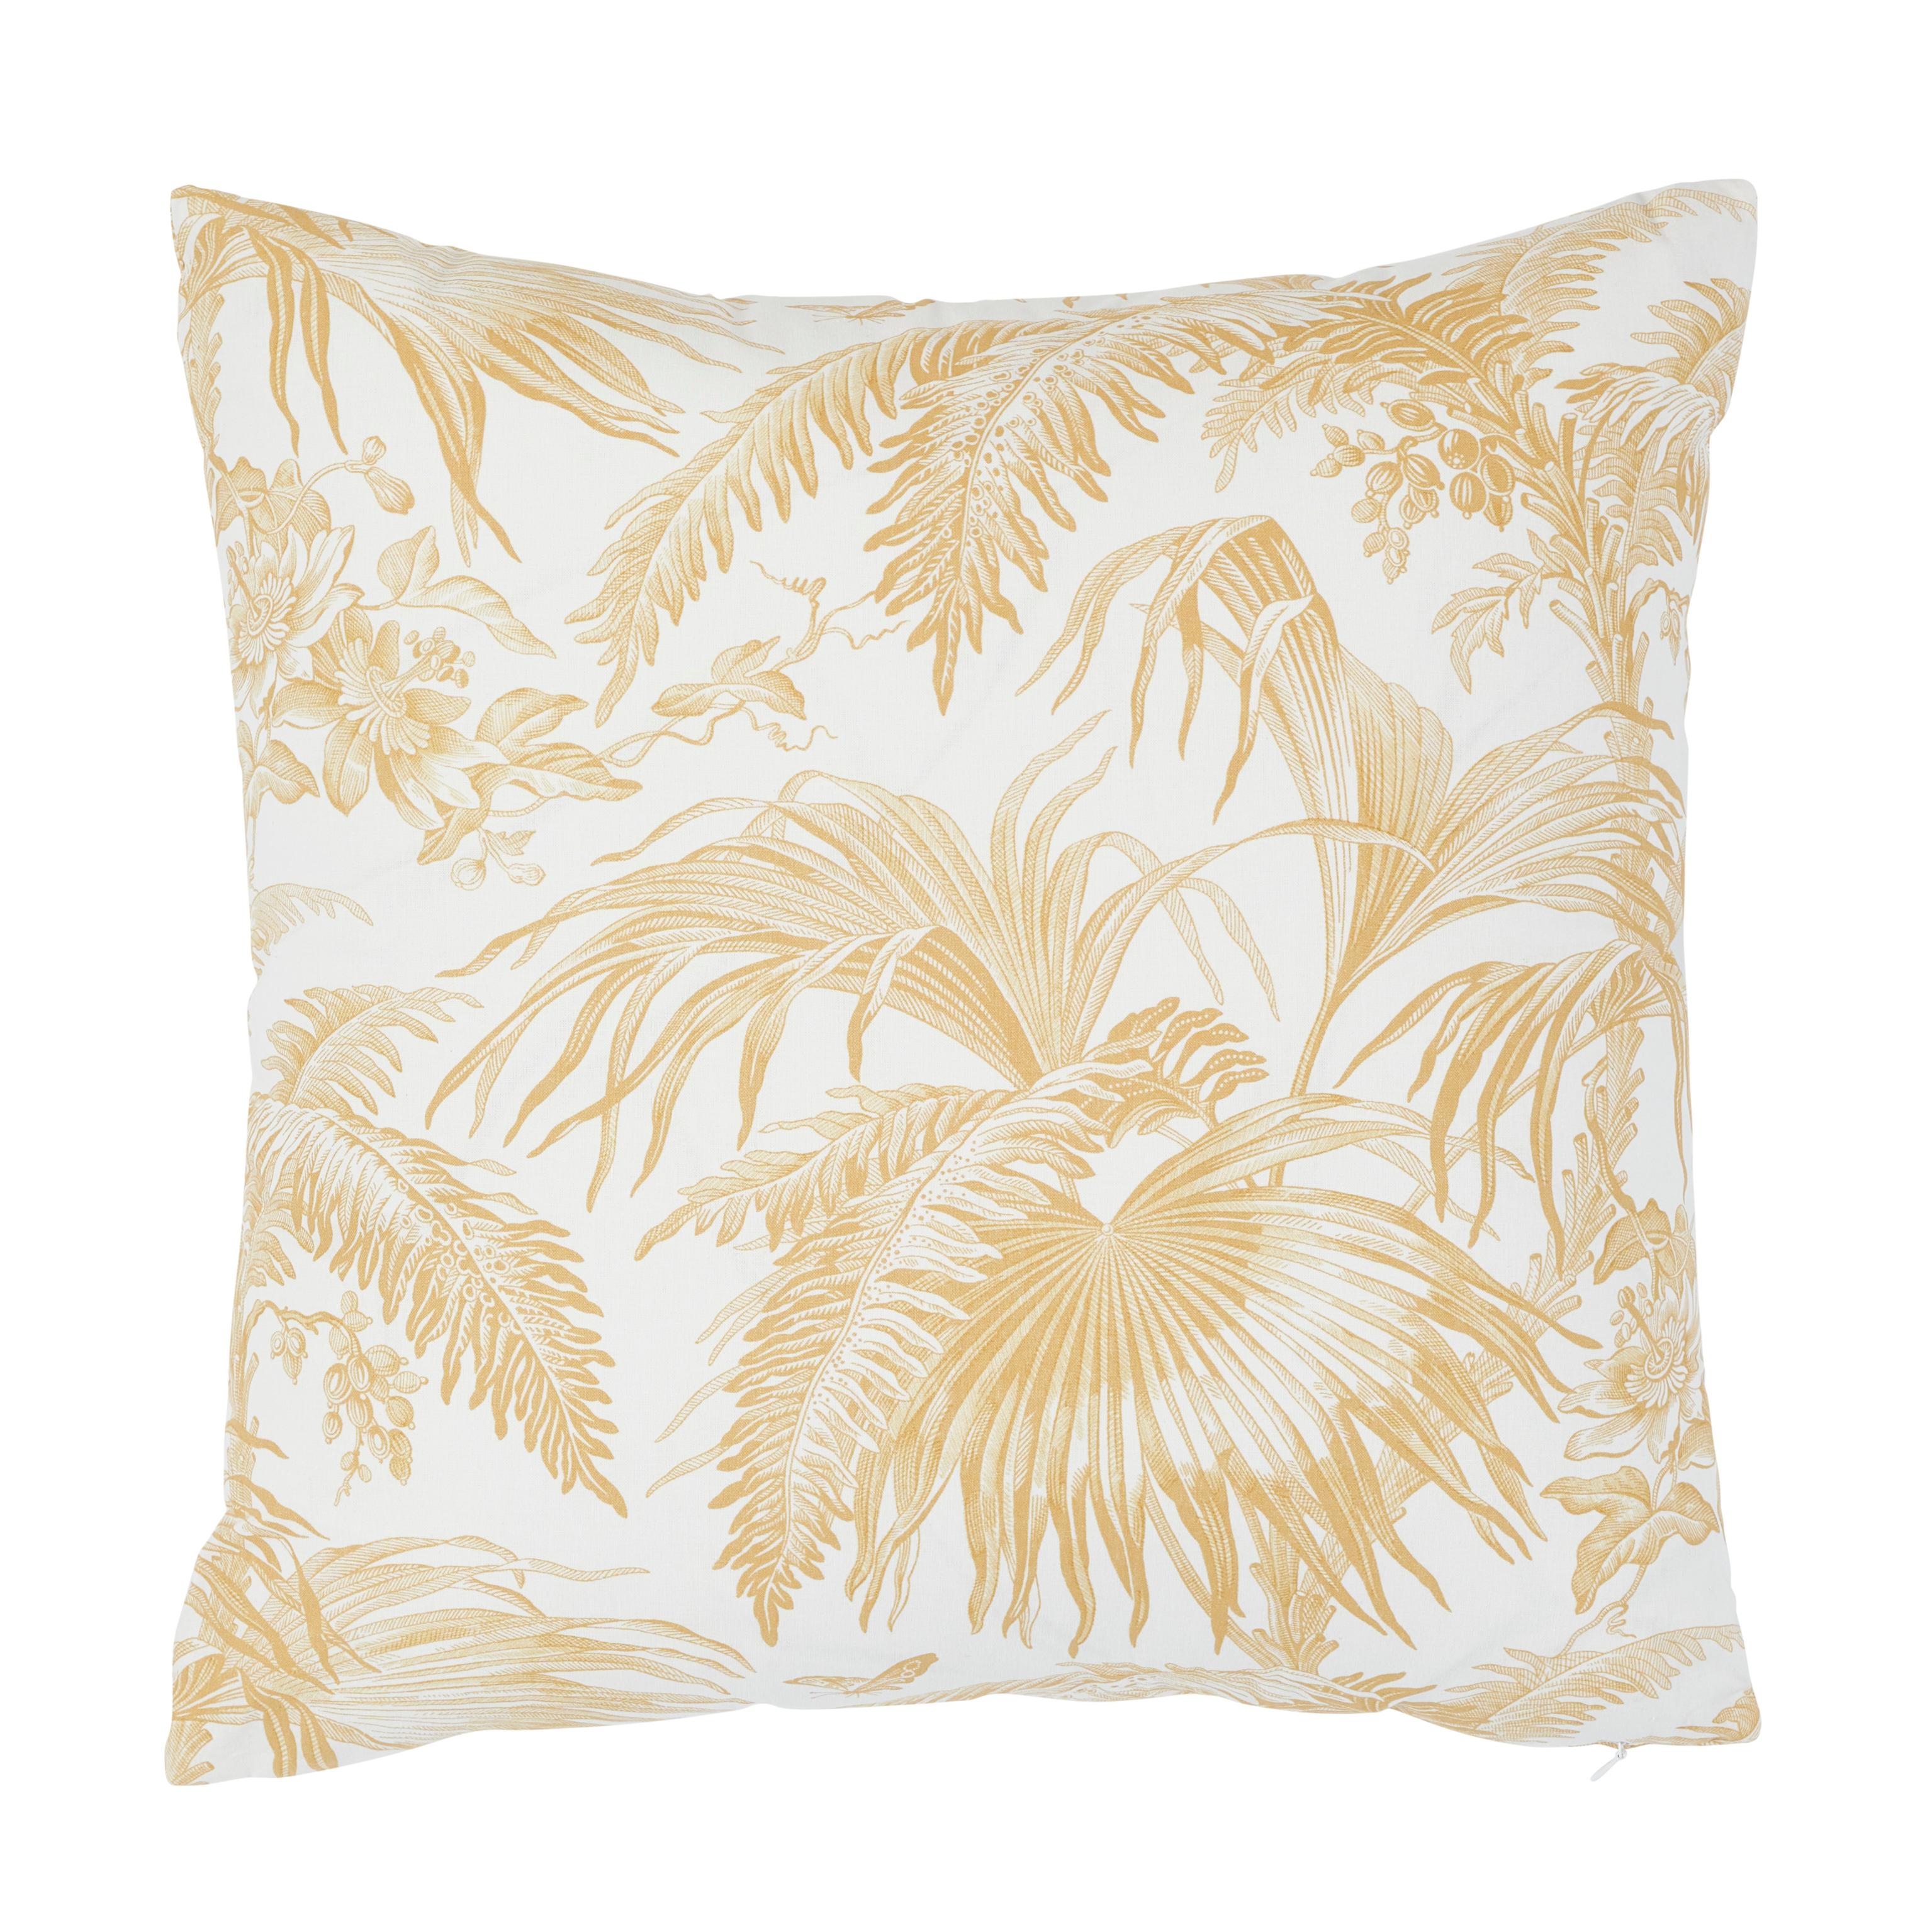 This pillow features Toile Tropique with a knife edge finish. A nod to the illustrations of early-1800s botanical etchers‚Äîthe artists-in-residence on seagoing voyages who sketched newly-discovered tropical flora in exquisite detail‚Äîthis